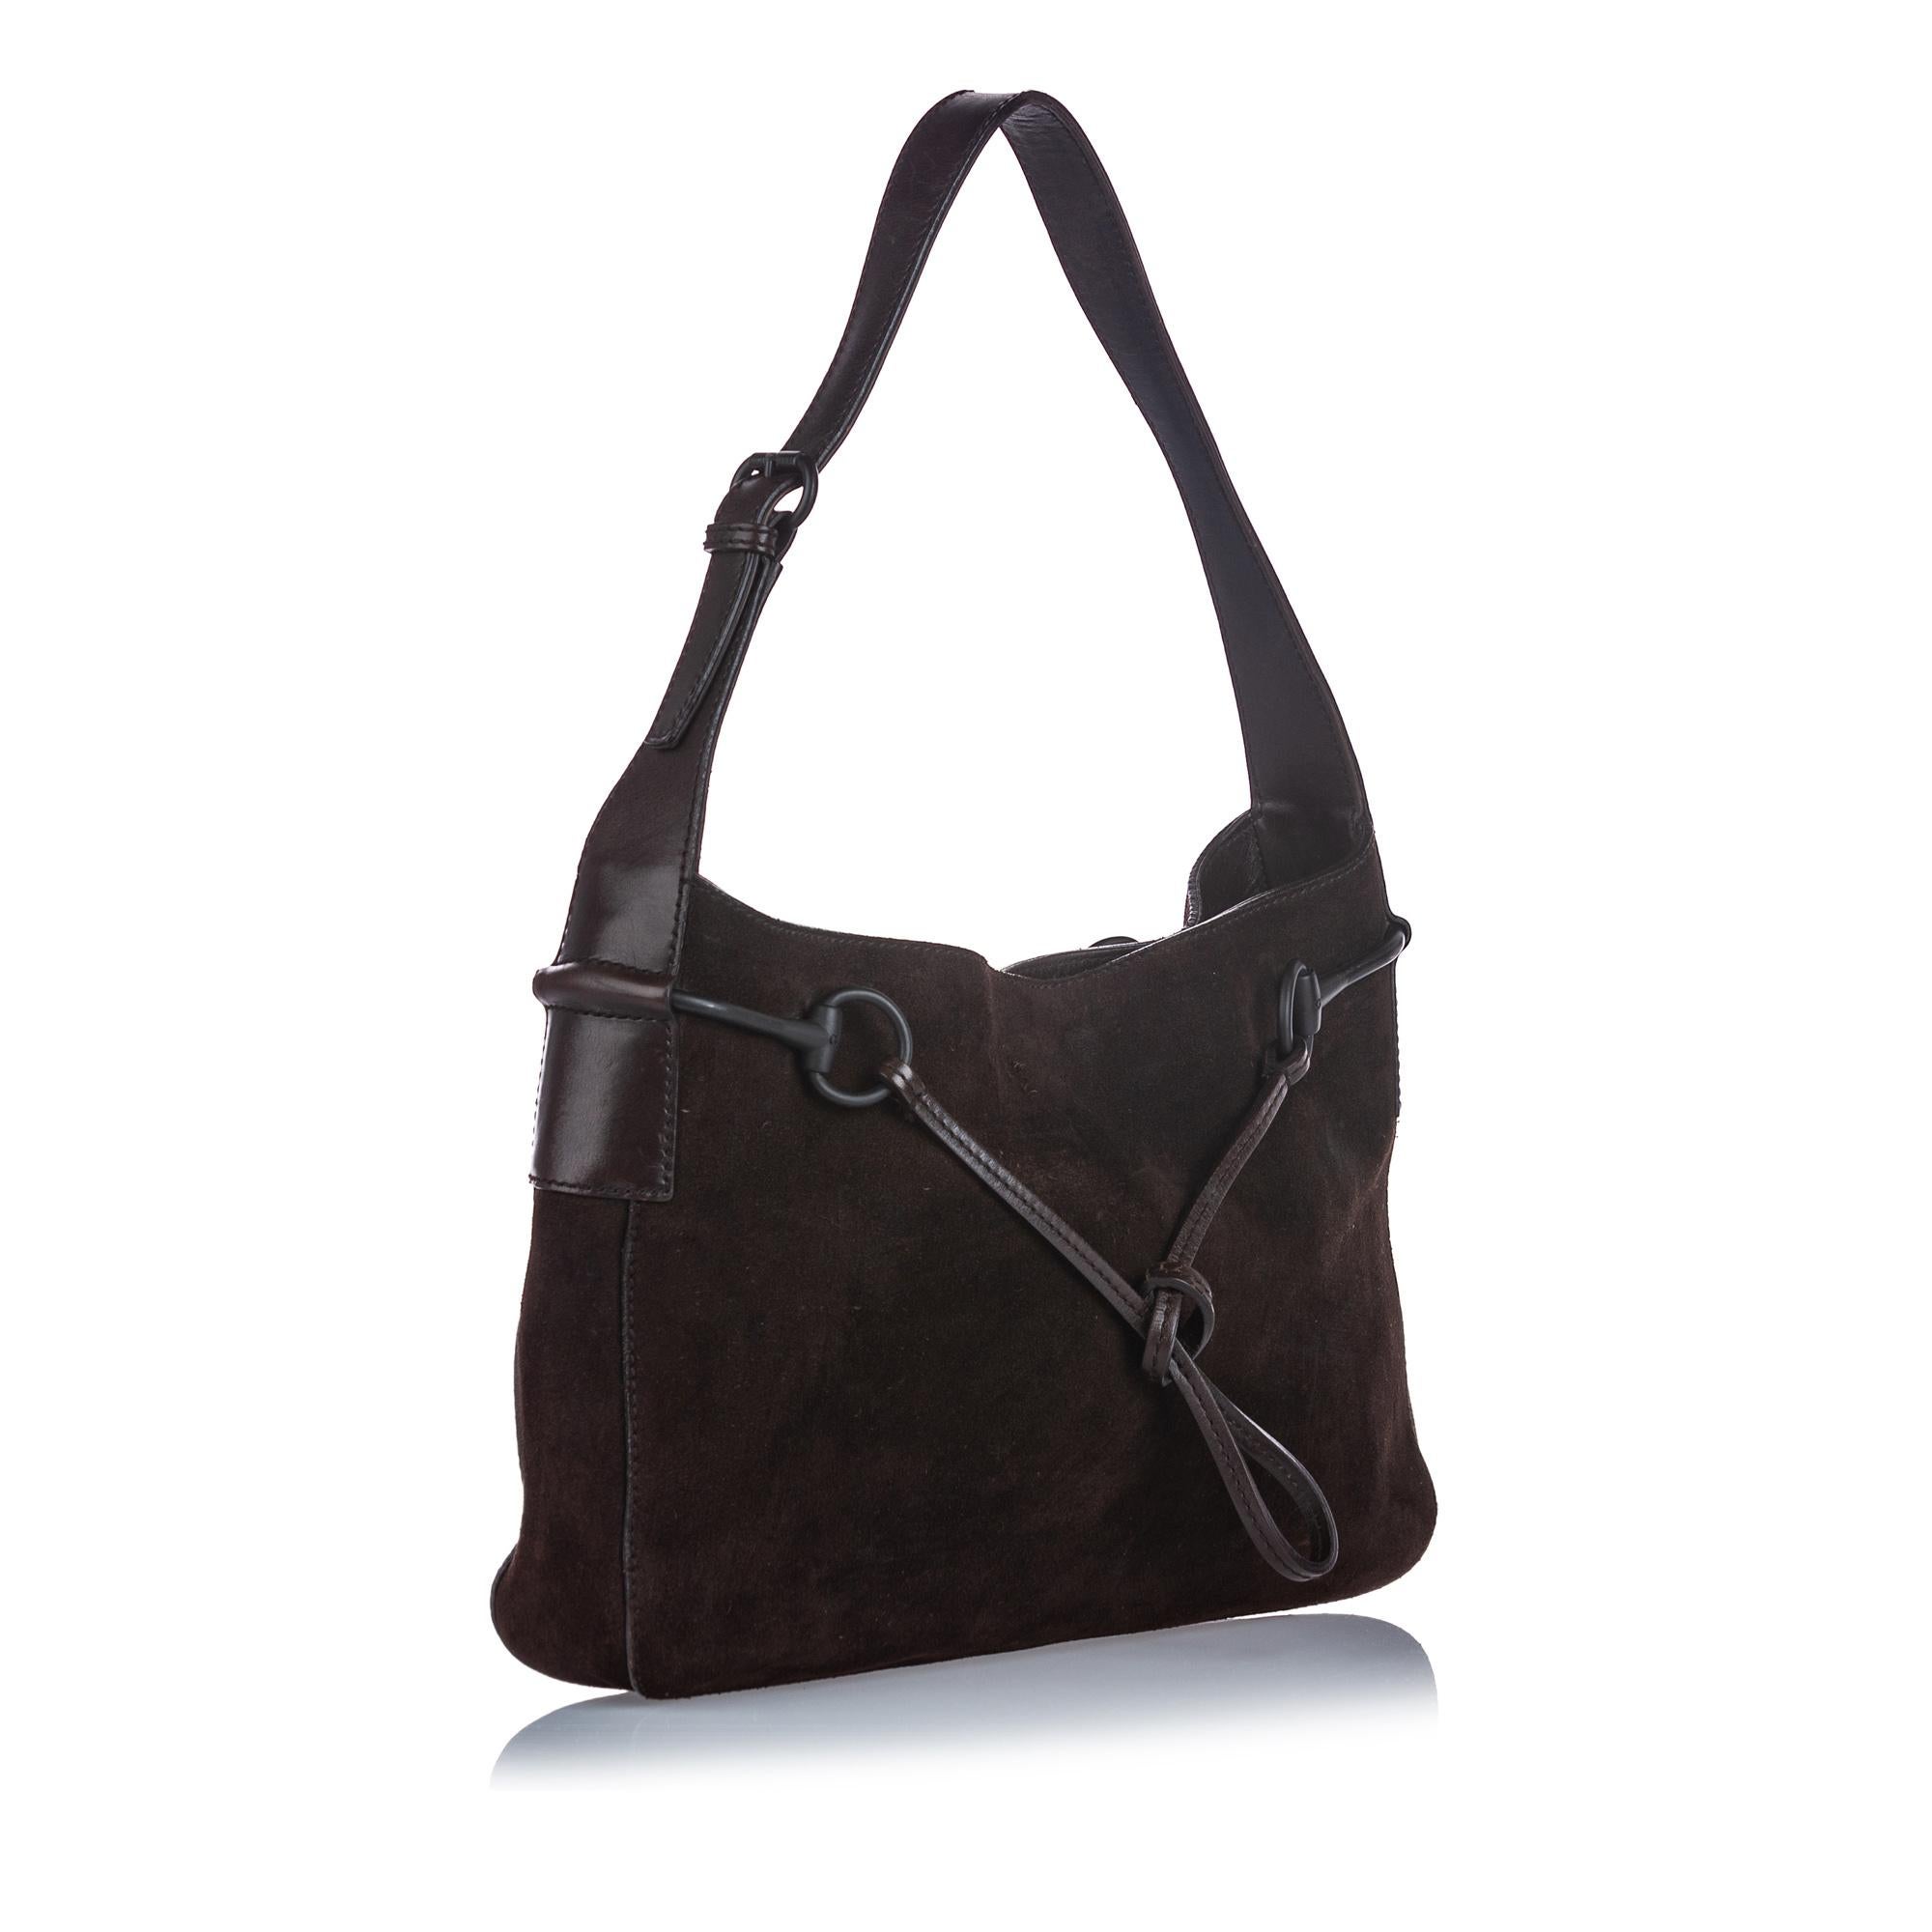 This shoulder bag features a suede body, a flat leather strap, an open top with a magnetic closure, and an interior zip pocket. It carries as B+ condition rating.

Inclusions: 
This item does not come with inclusions.

Dimensions:
Length: 24.00